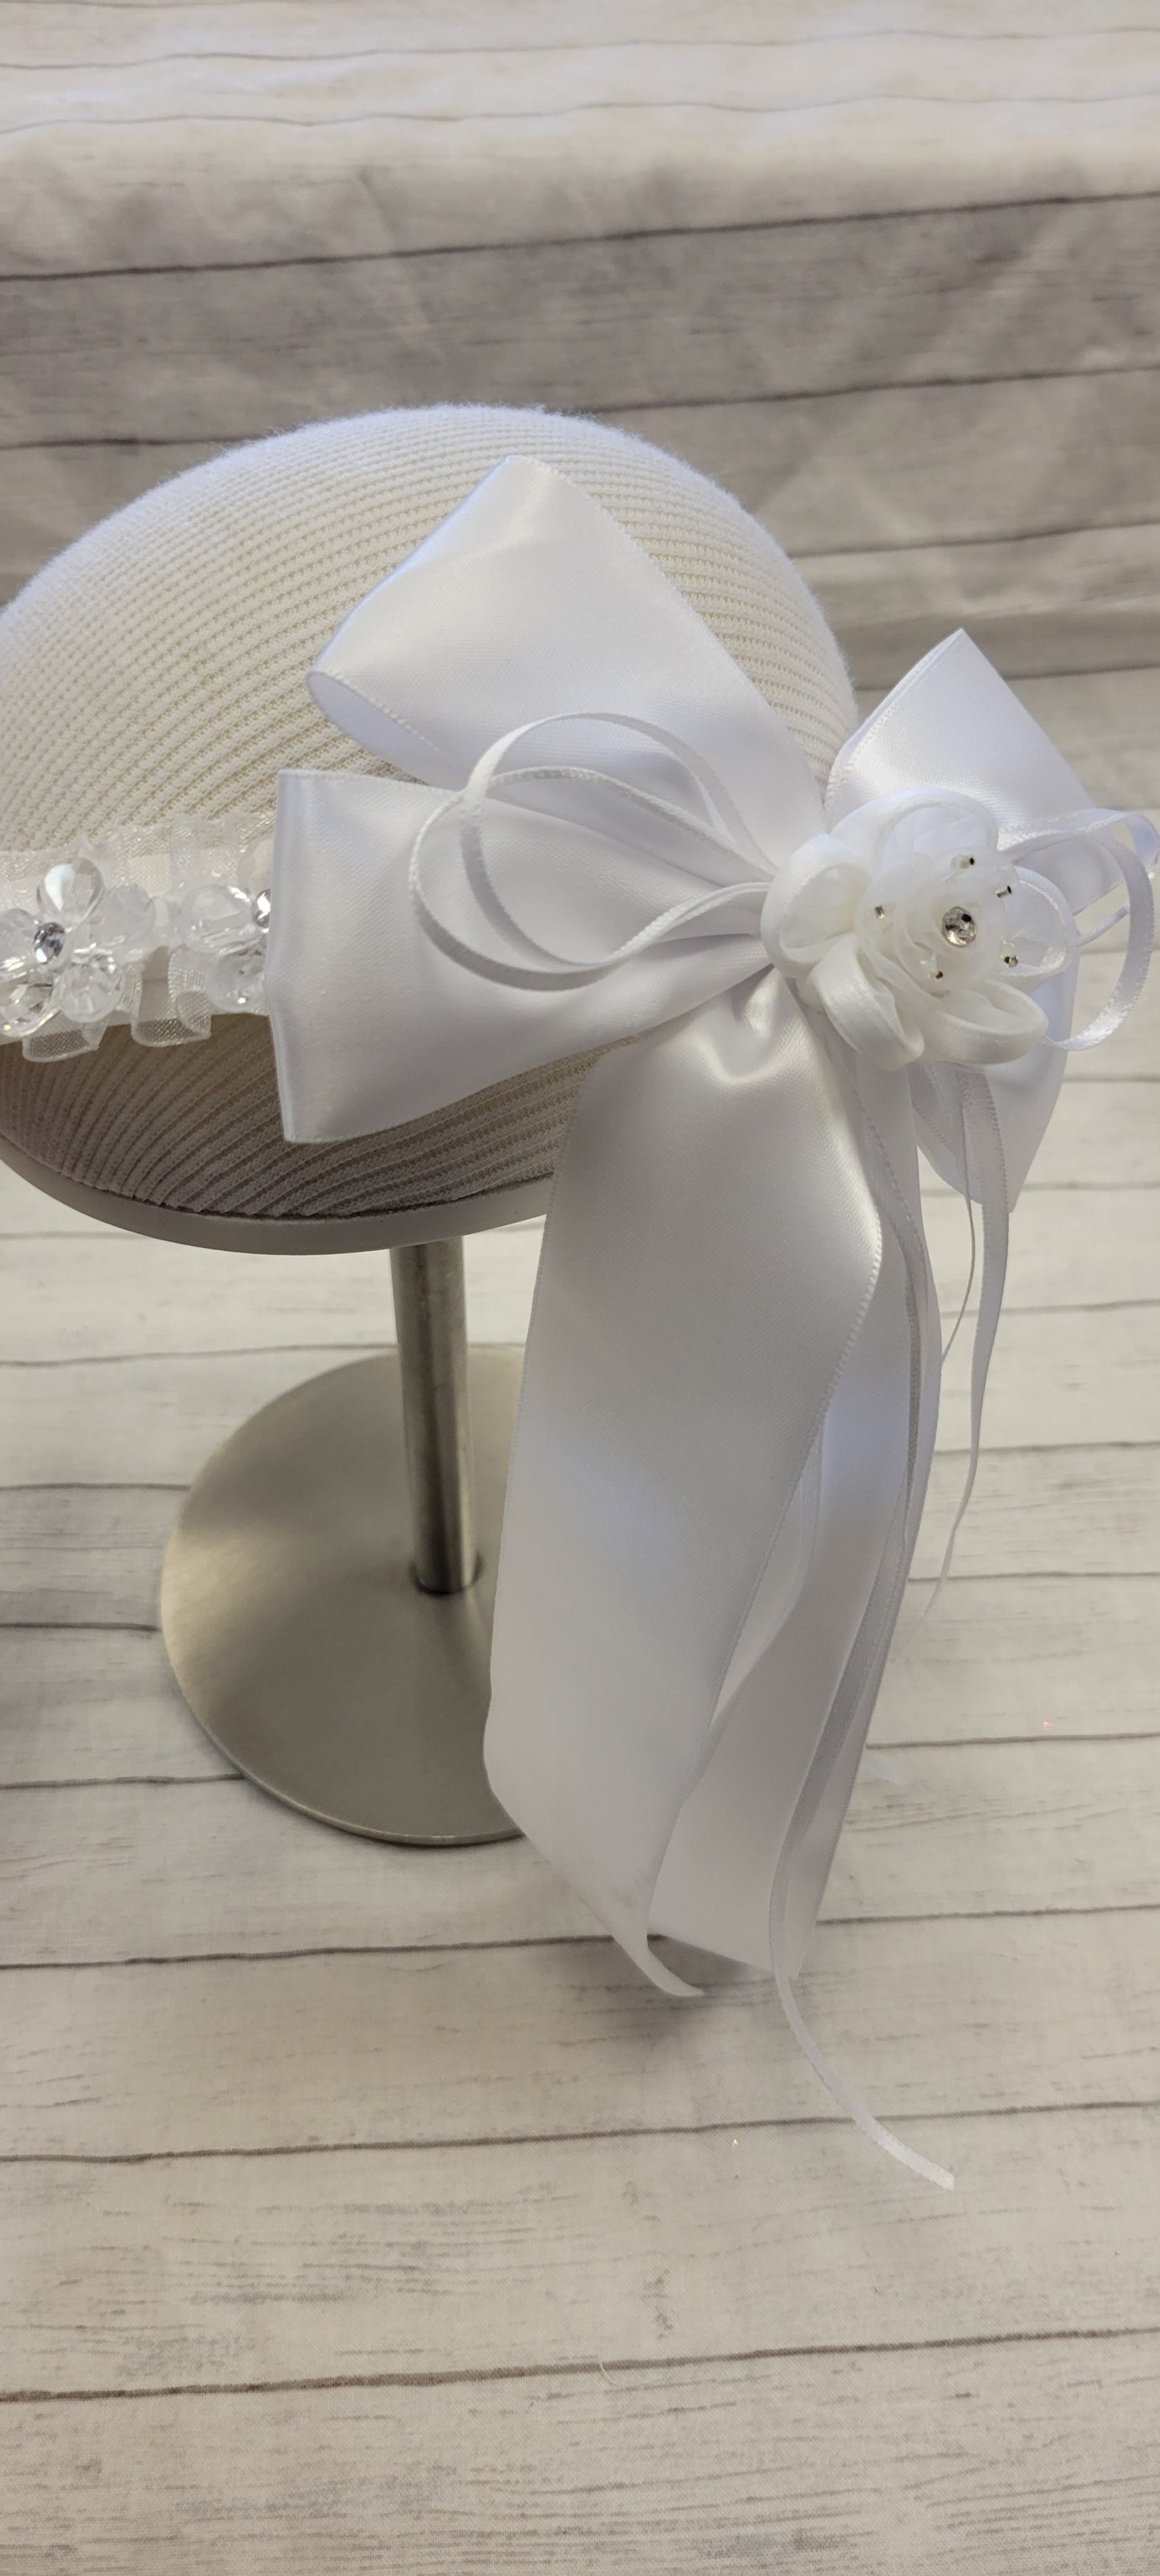 Girls First Communion Flower Crown Veil. Features Organza Flowers with Rhinestones and Pearls